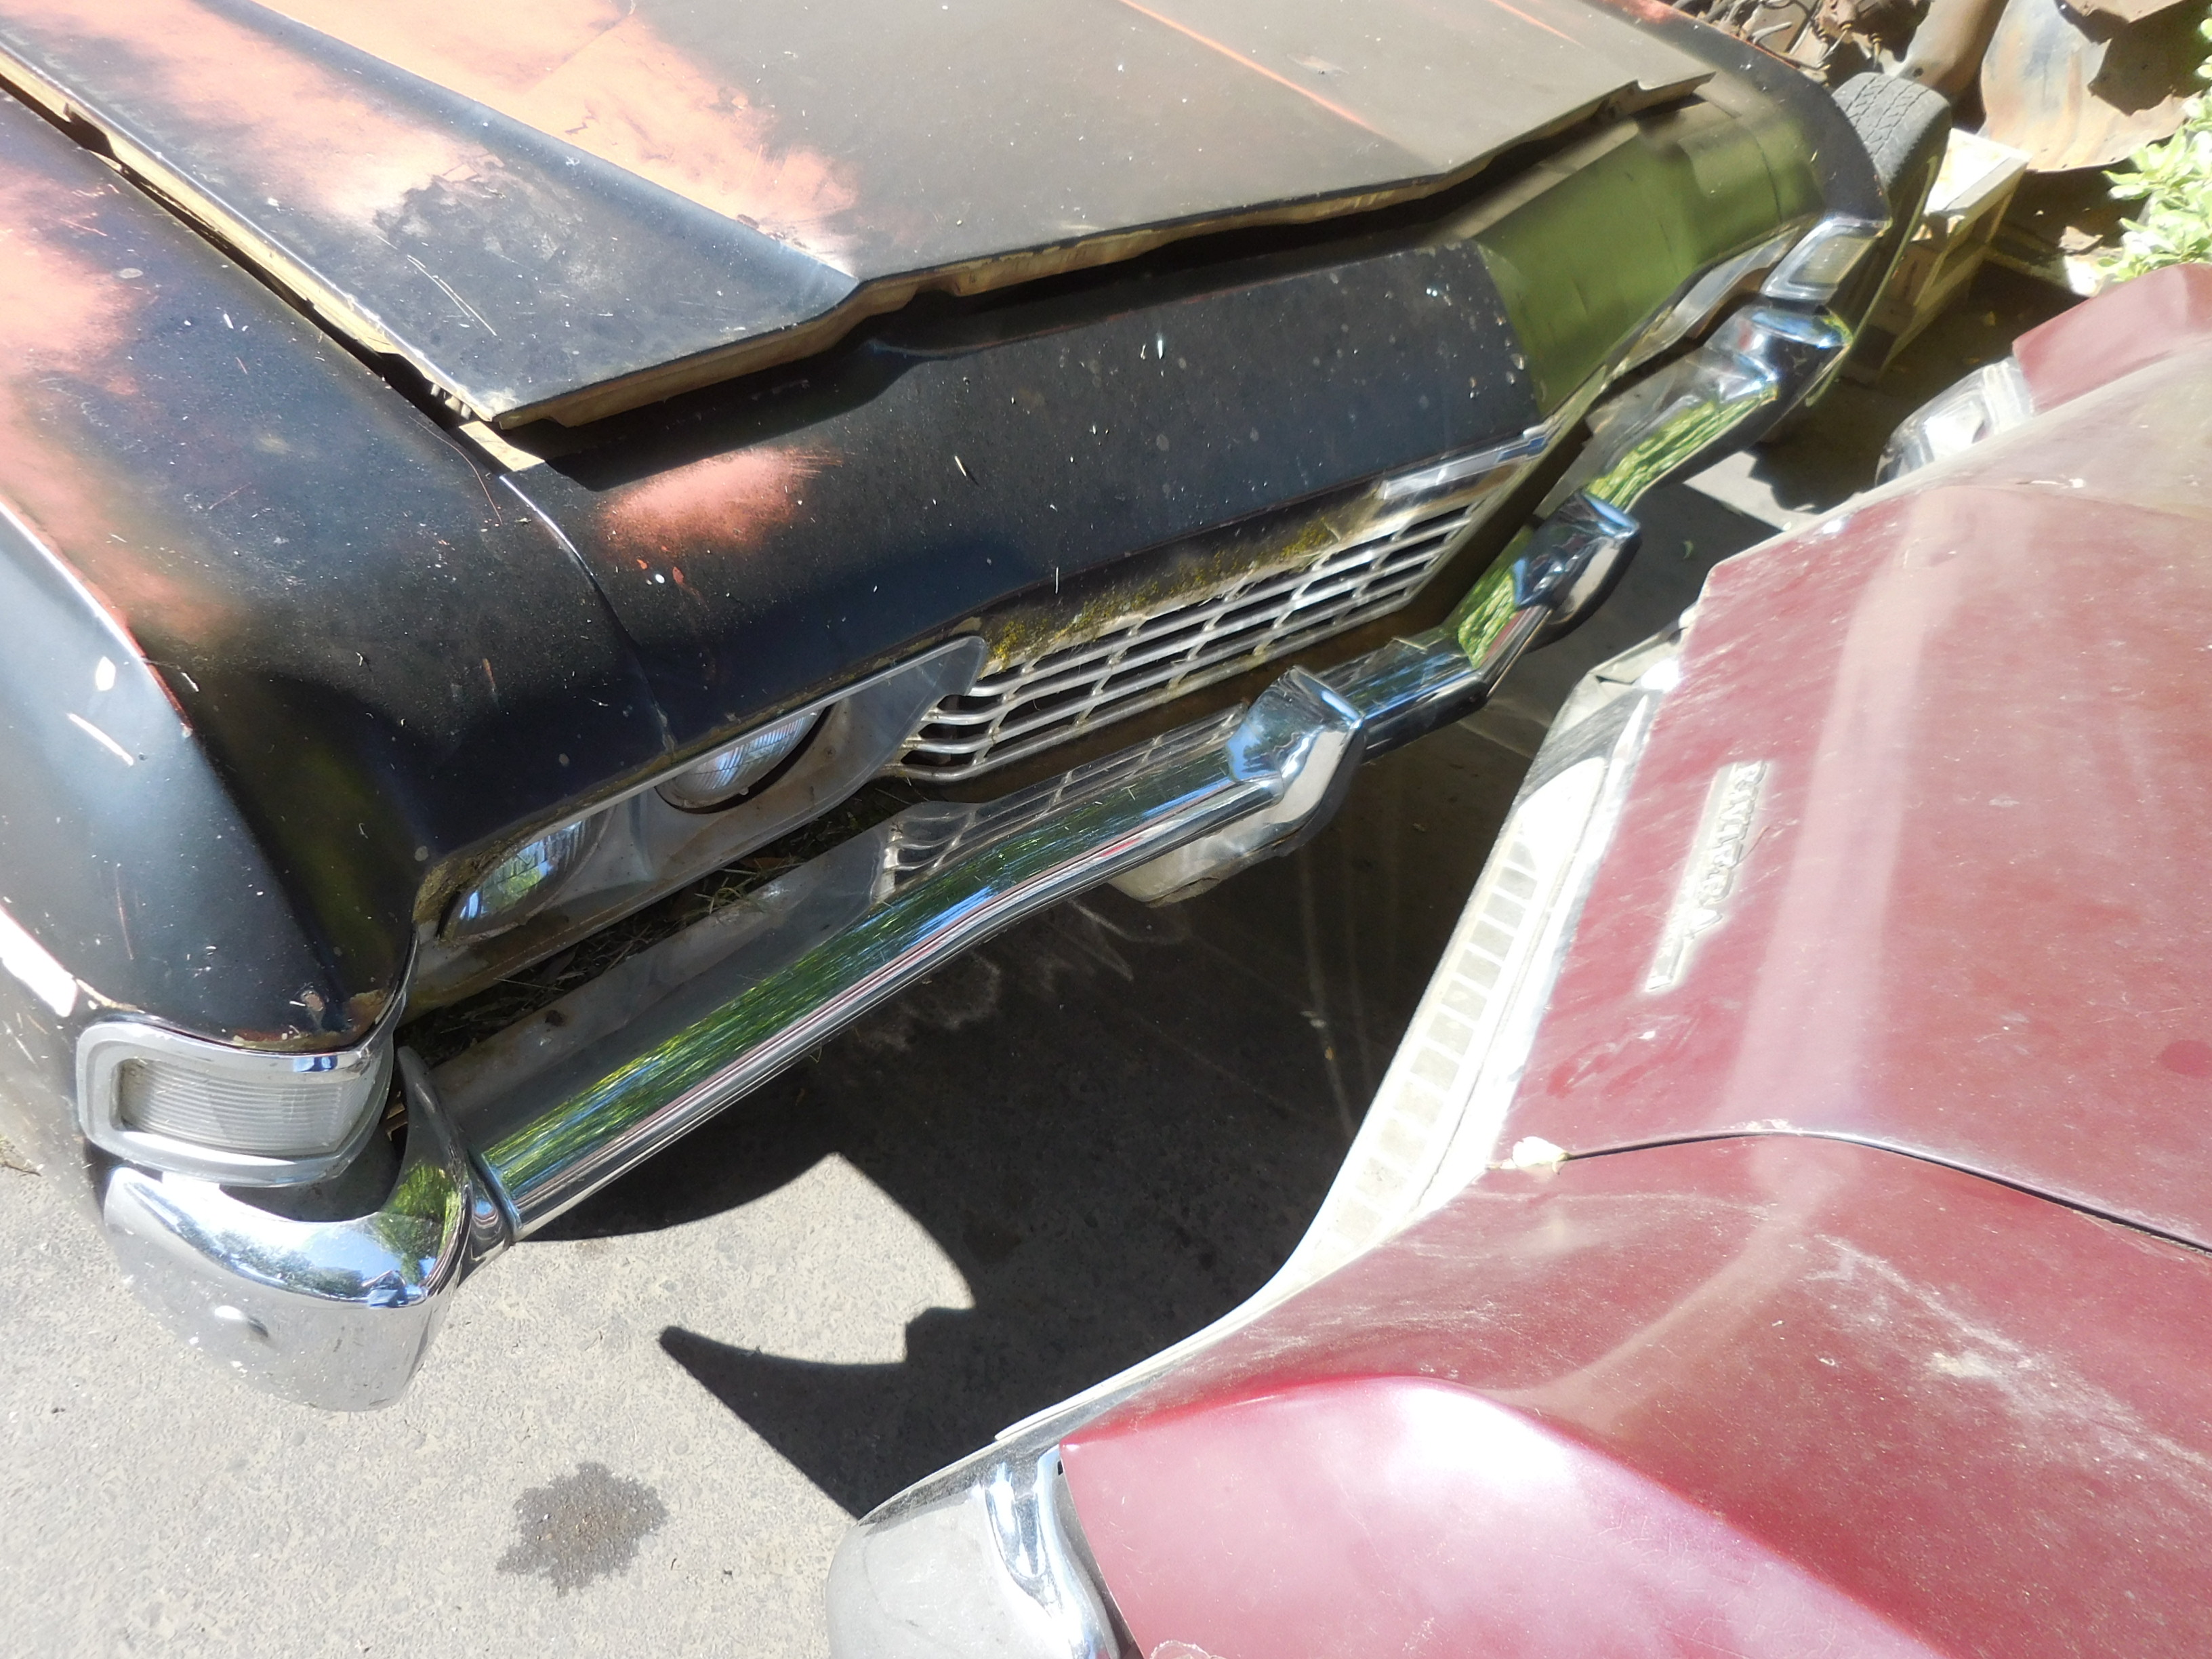 We just got in many body parts from a 1968 Impala 2 door hard top. We have fenders, doors, bumpers, quarter panels, hood, and many misc parts. Call for details 209-462-4300.